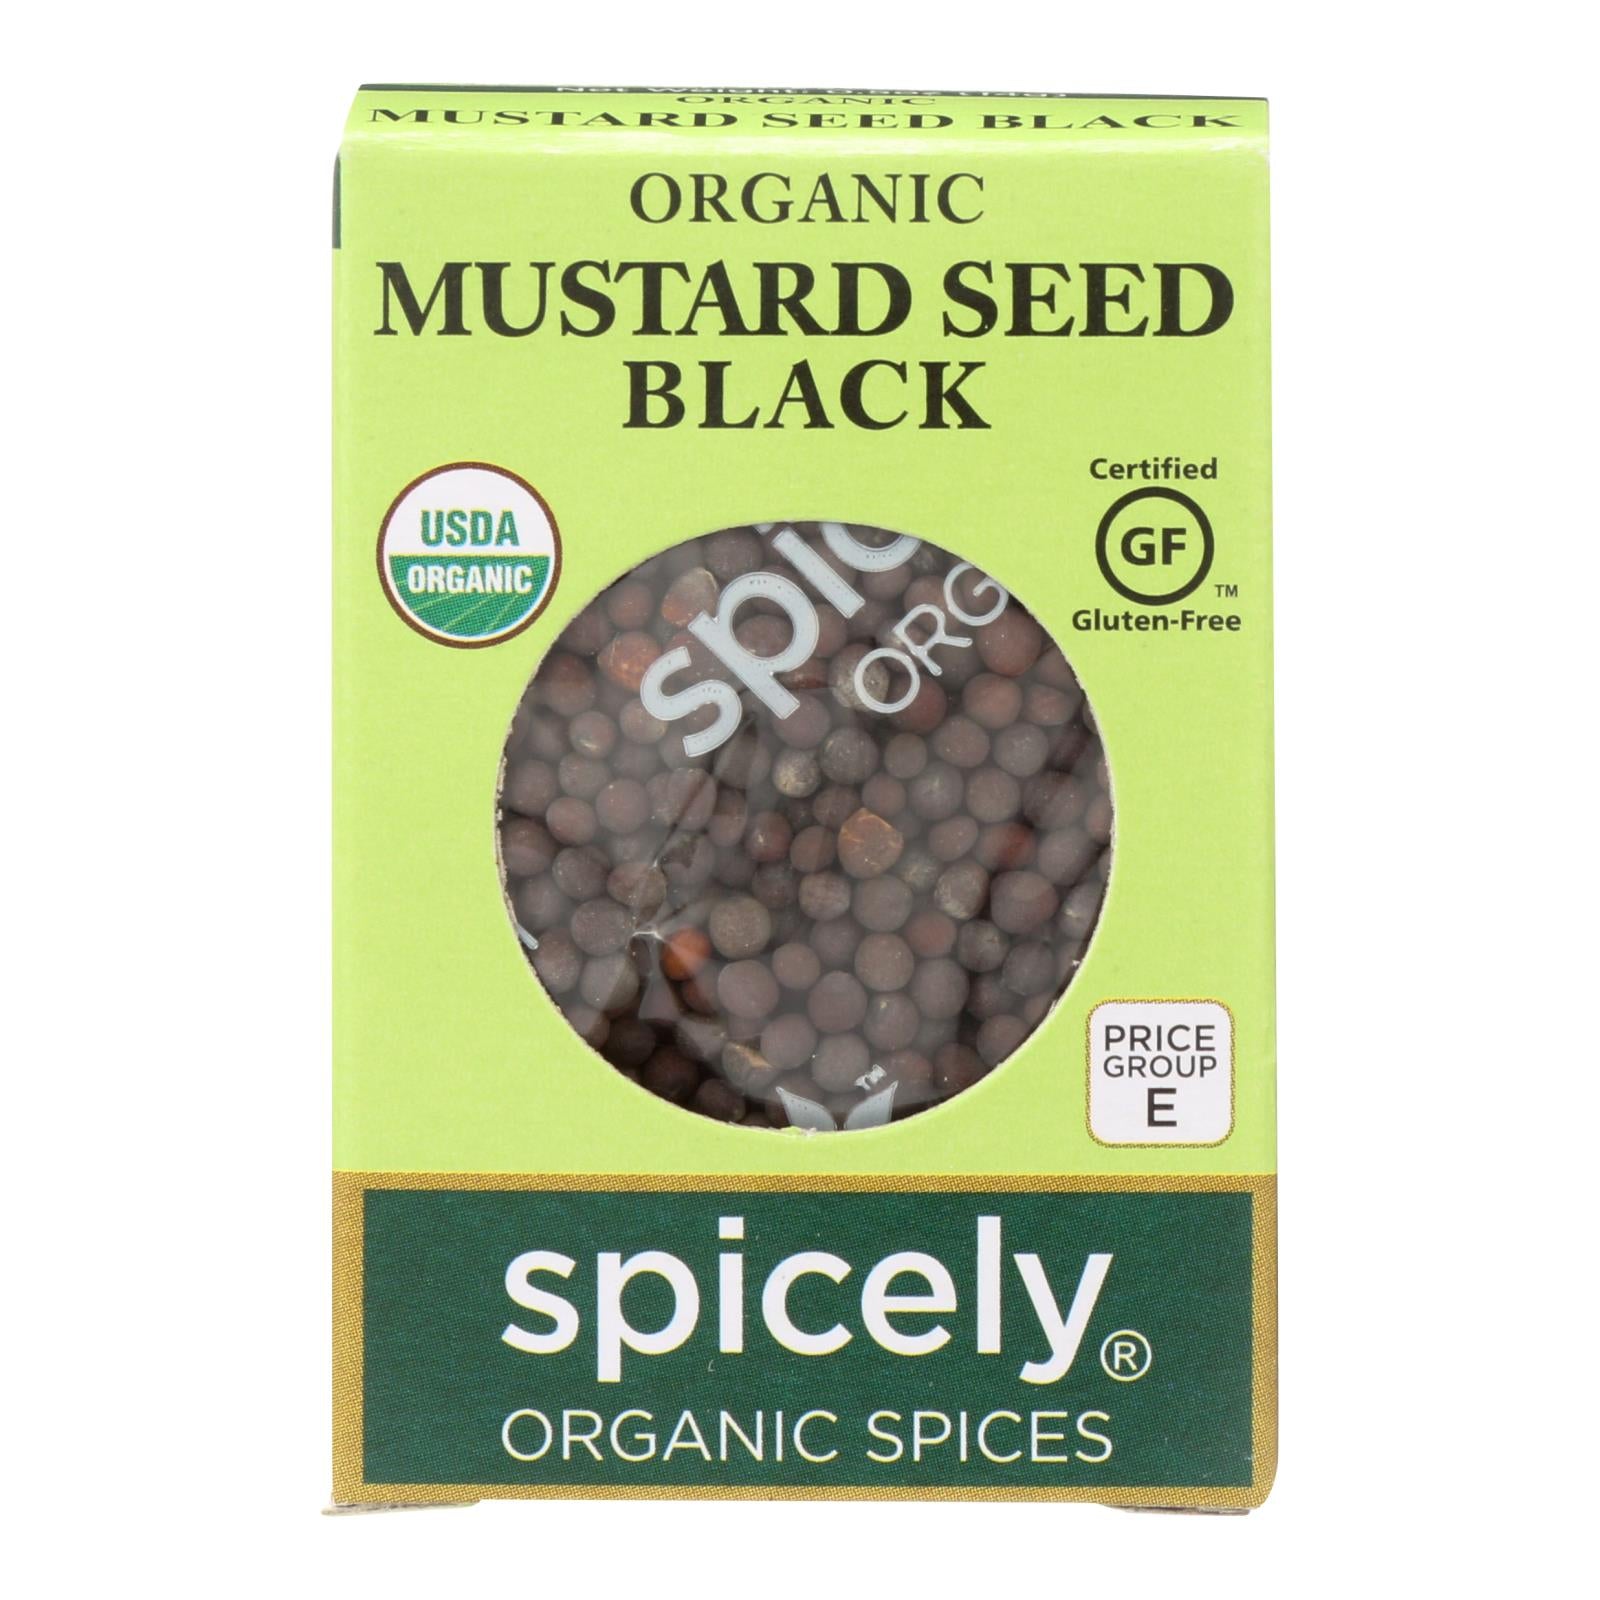 Spicely Organics - Organic Mustard Seed - Black - Case Of 6 - 0.5 Oz. - Whole Green Foods